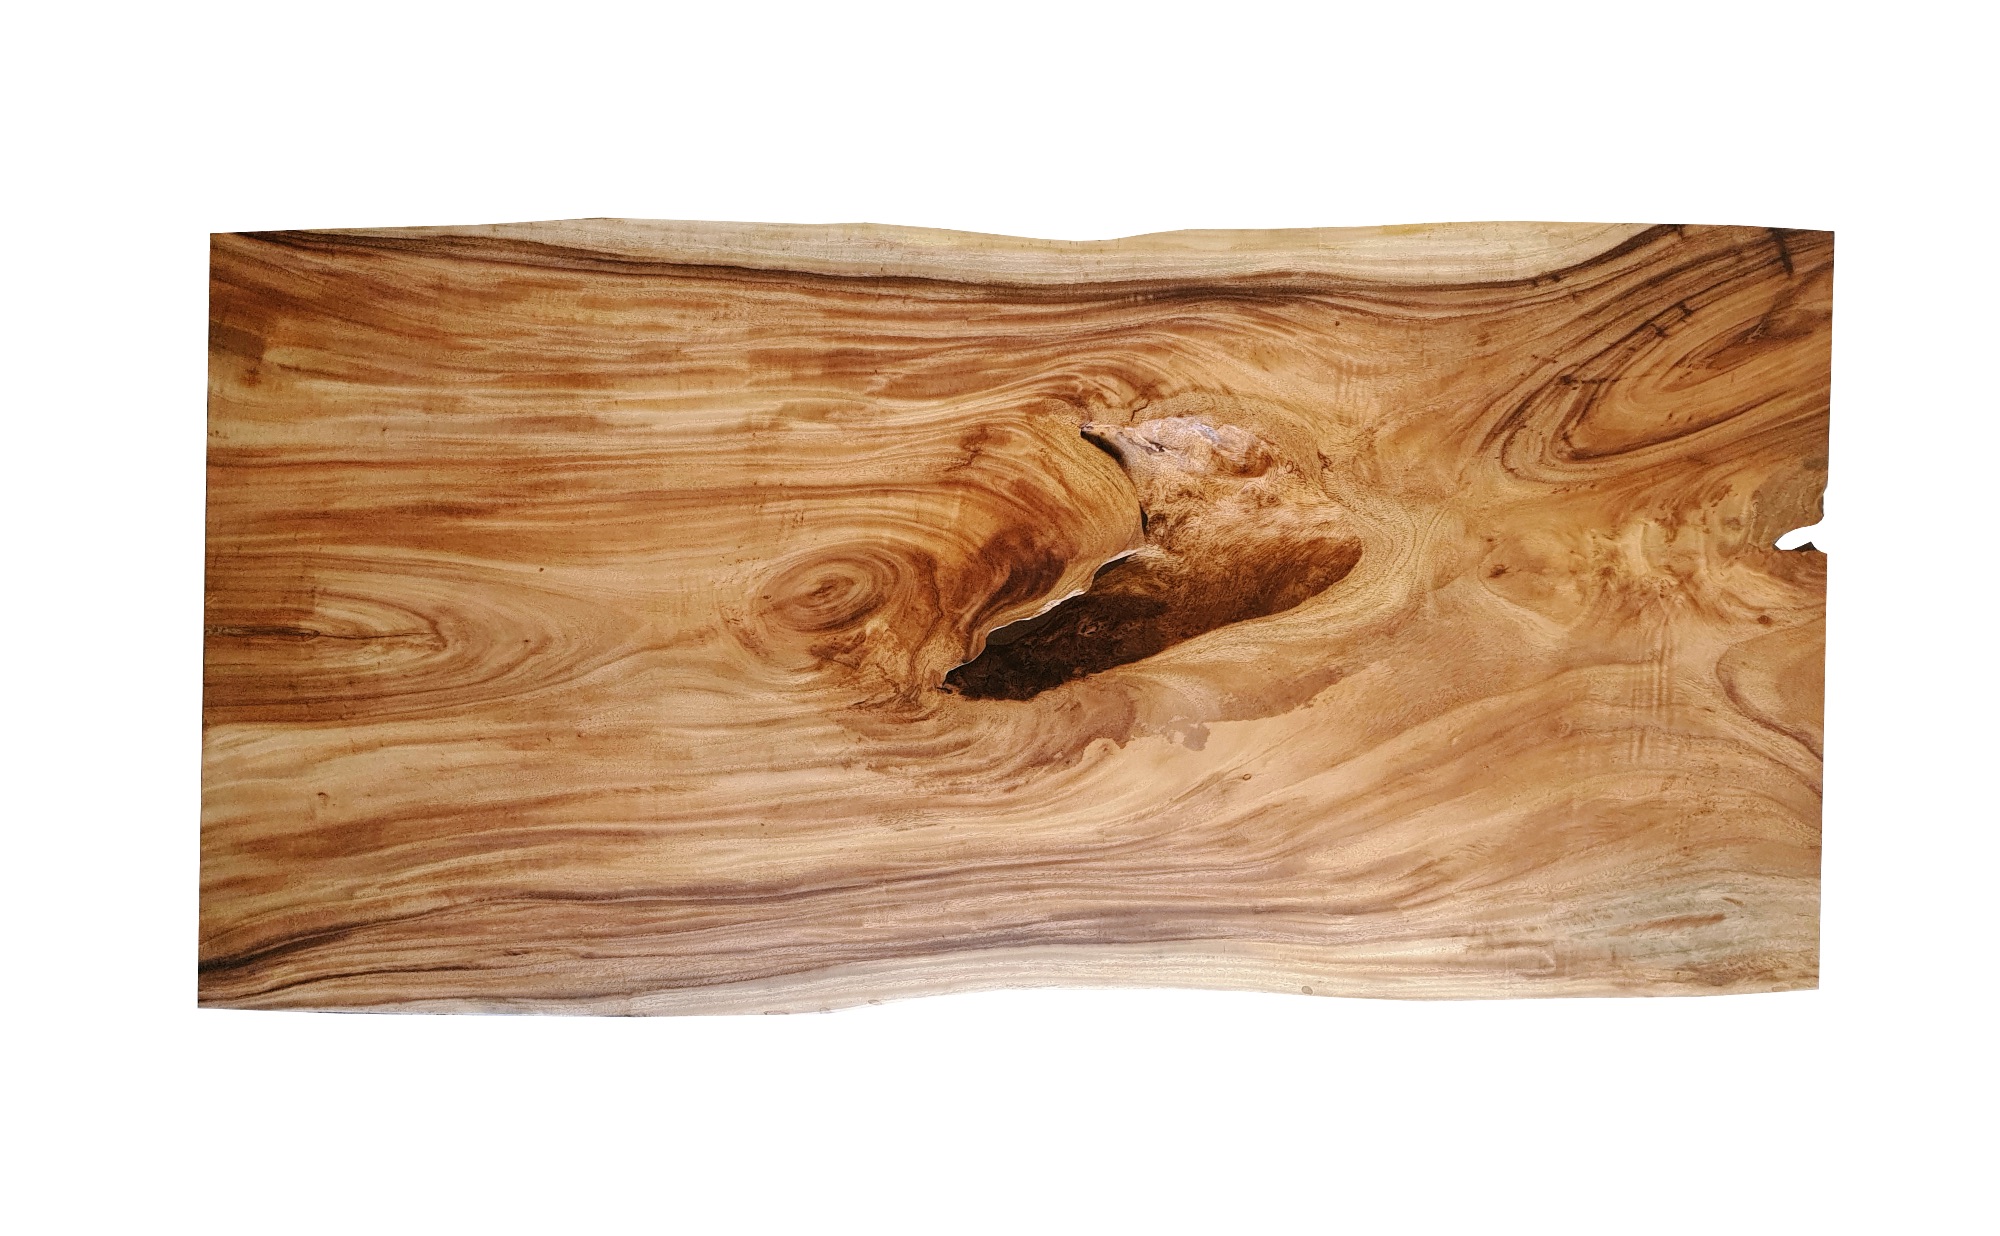 Buy Acacia Wood Live Edge Dining Table 79 x 36 − 40 x 2 Inches with ...